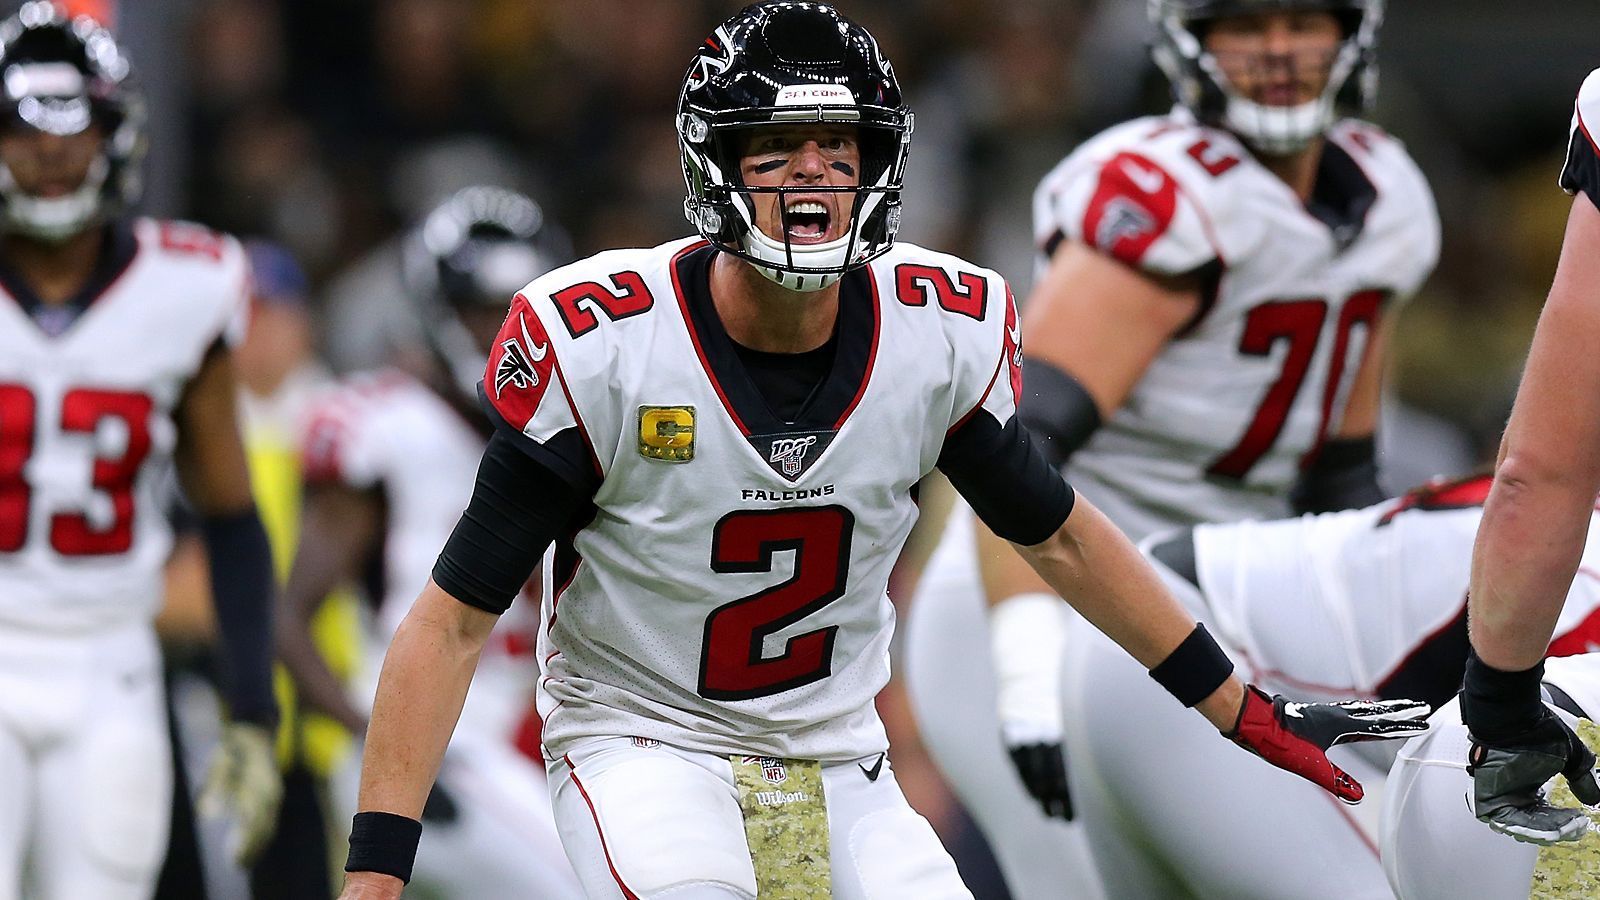 
                <strong>Atlanta Falcons</strong><br>
                Ausgeschieden nach Woche 13AFC South:1. New Orleans Saints (9-2) 2. Tampa Bay Buccaneers (5-7)3. Carolina Panthers (5-7)4. Atlanta Falcons (3-9)
              